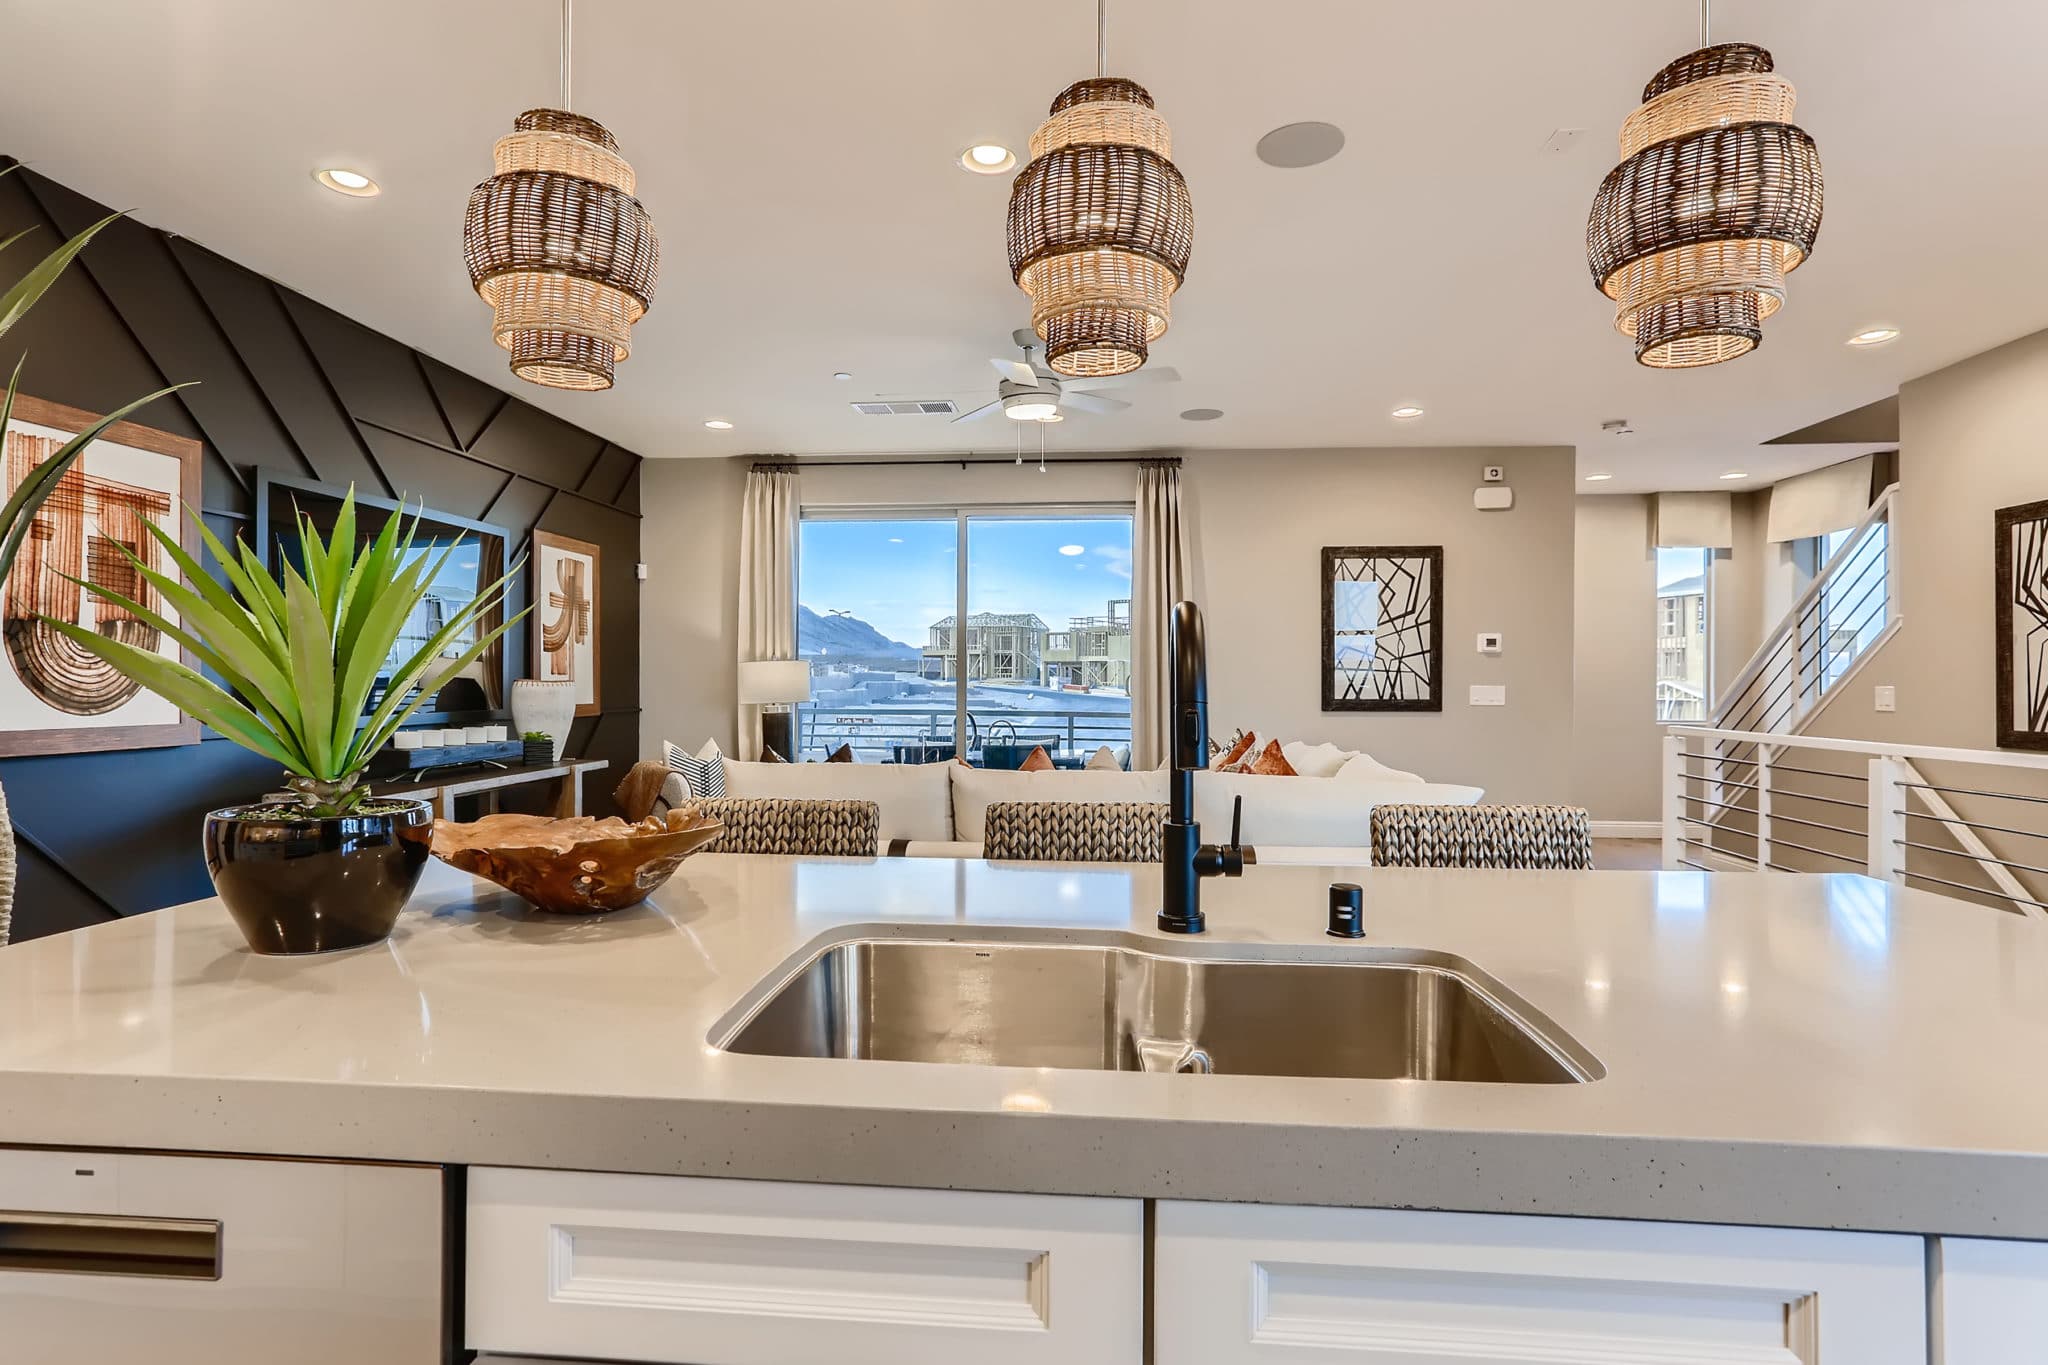 Kitchen of Sapphire Plan 5 at Obsidian by Woodside